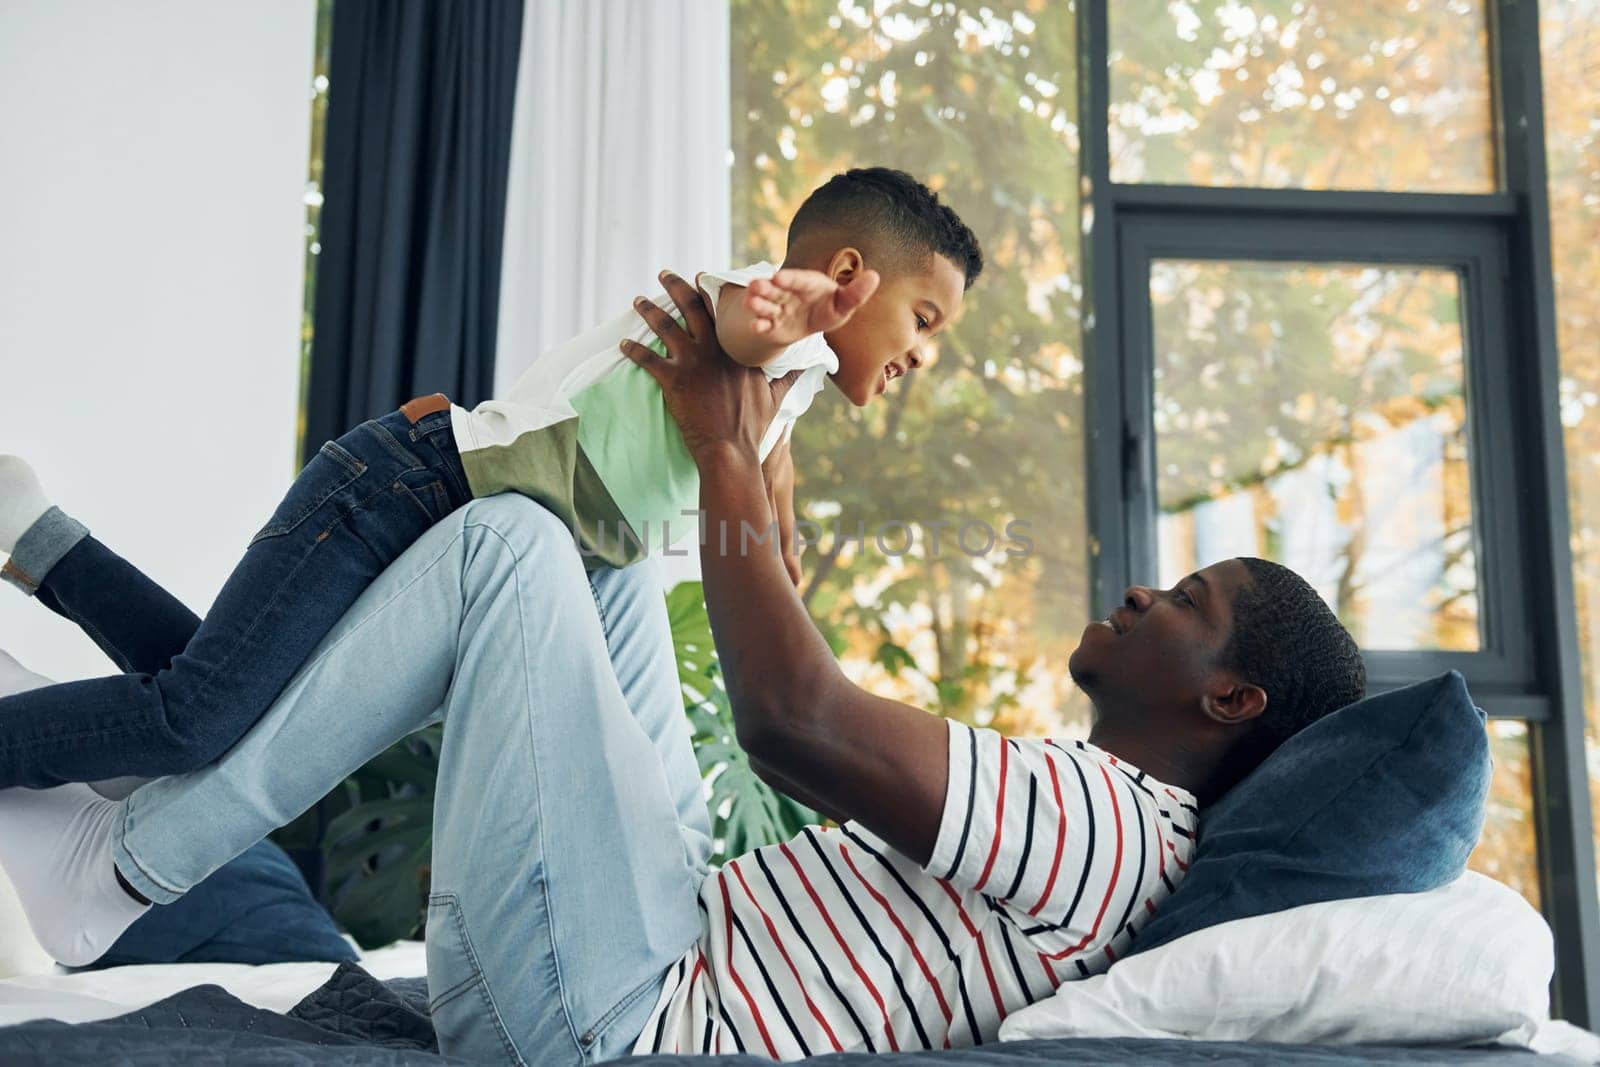 Laying down on the bed and having fun. African american father with his young son at home.